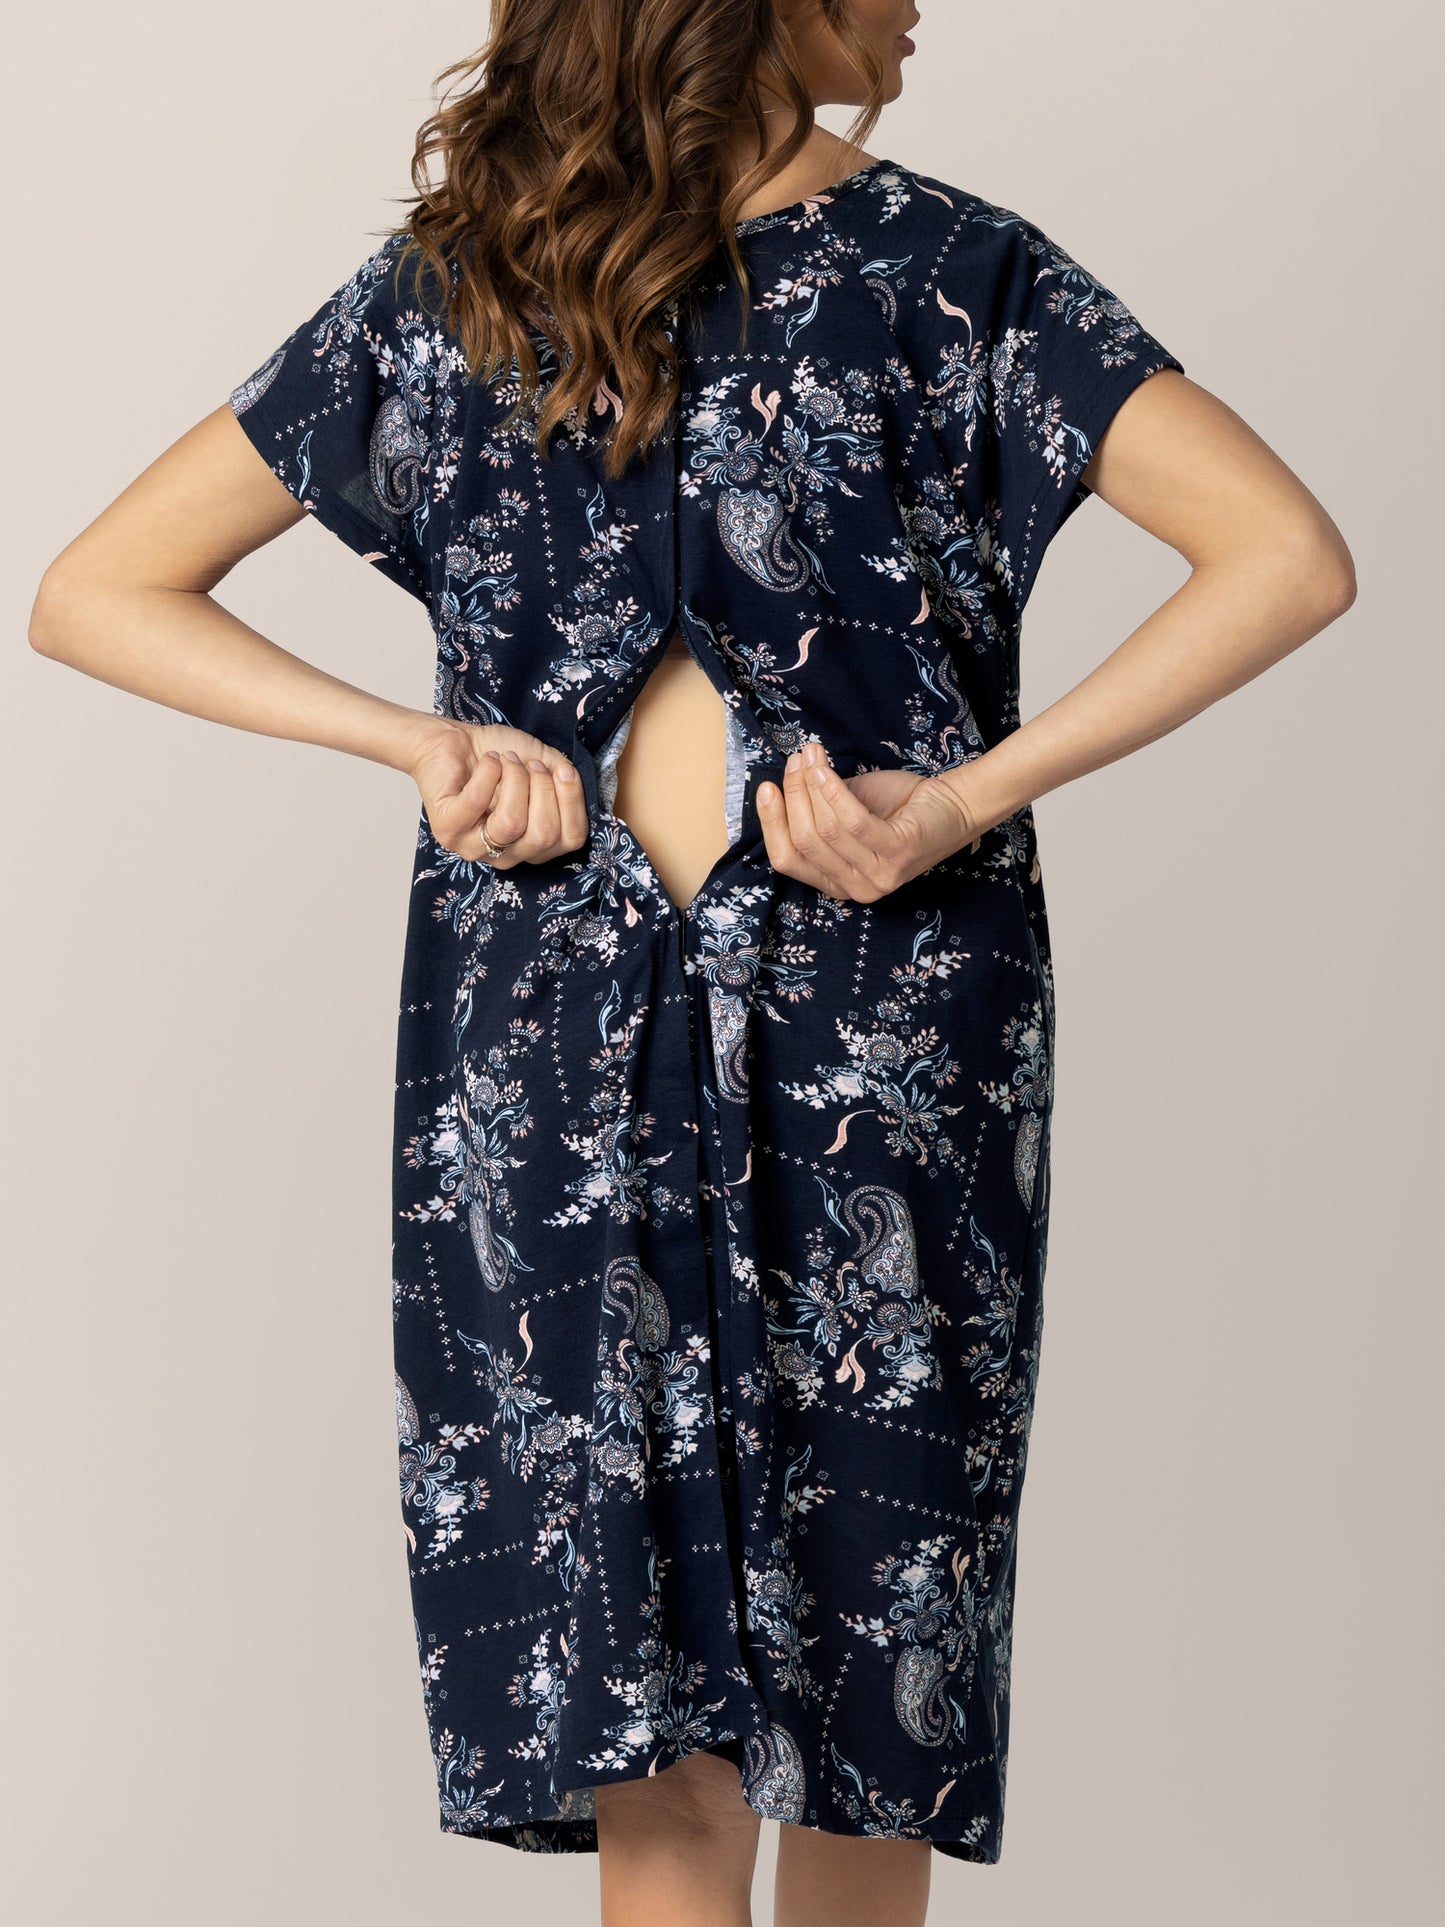 Back view of model wearing the Universal Labor & Delivery Gown in Navy Paisley, showing opening.